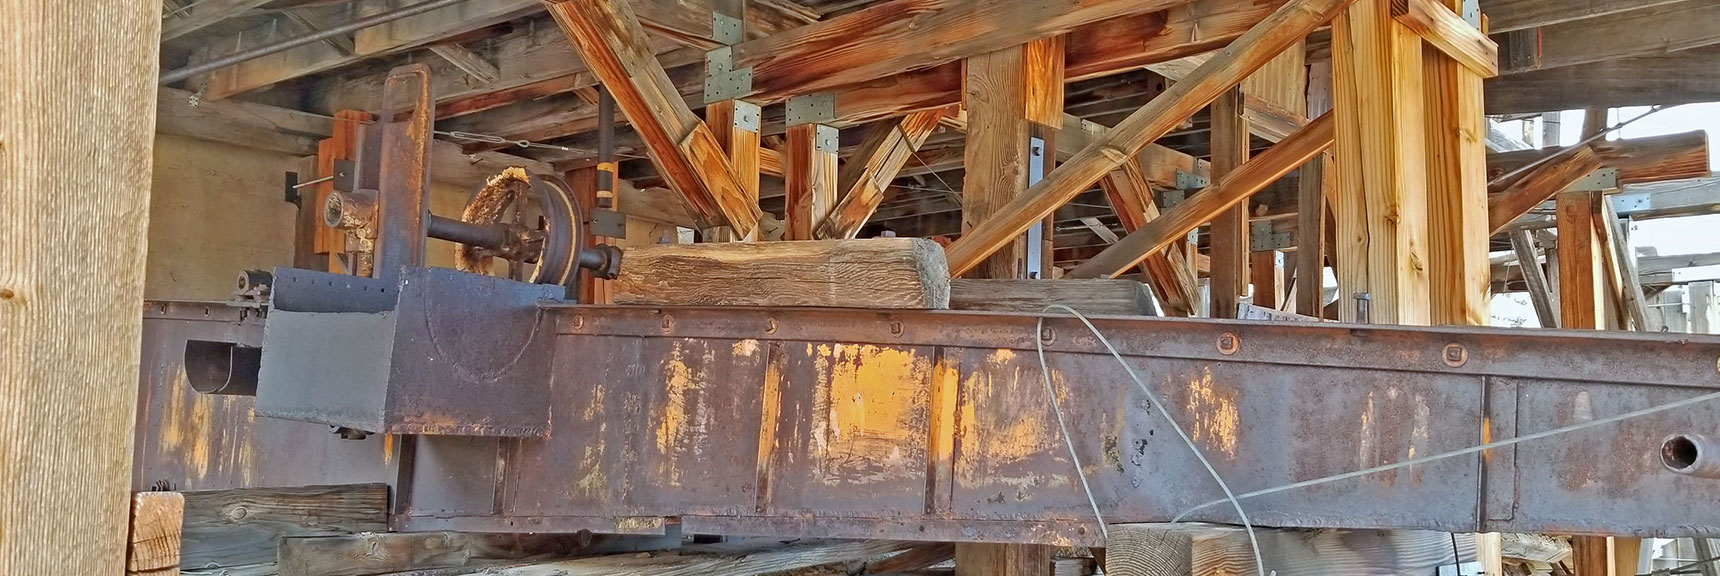 Continuing Down Side of Stamp Mill. Note Newer Support Cables Recently Installed | Skidoo Stamp Mill, Panamint Mountains, Death Valley National Park, CA